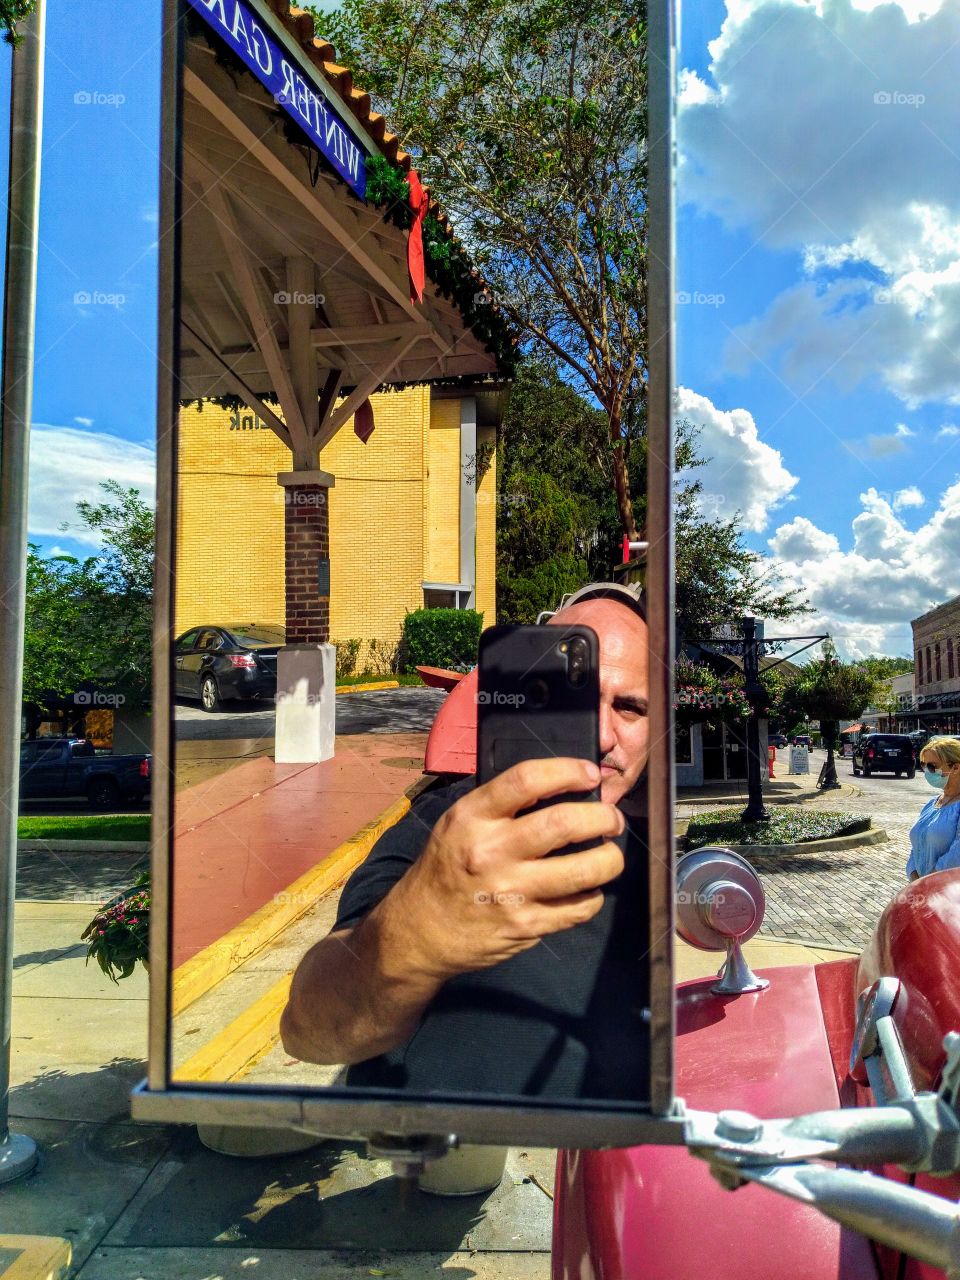 reflective shot from mirror on old fire truck